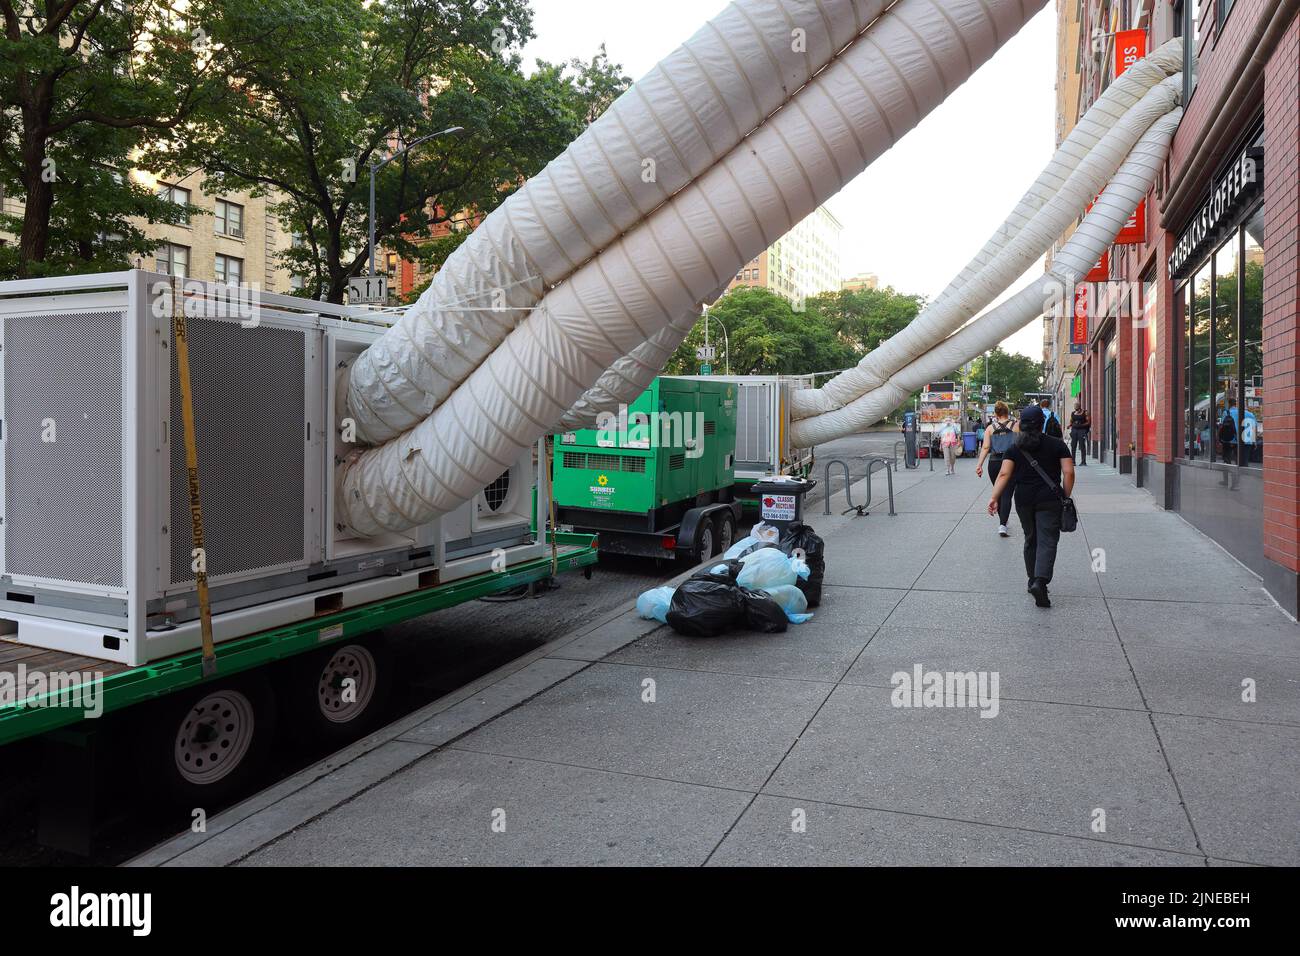 Rental portable air conditioning units, portable cooling, on a trailer cooling an event space in a building in Manhattan's Upper West Side, New York. Stock Photo